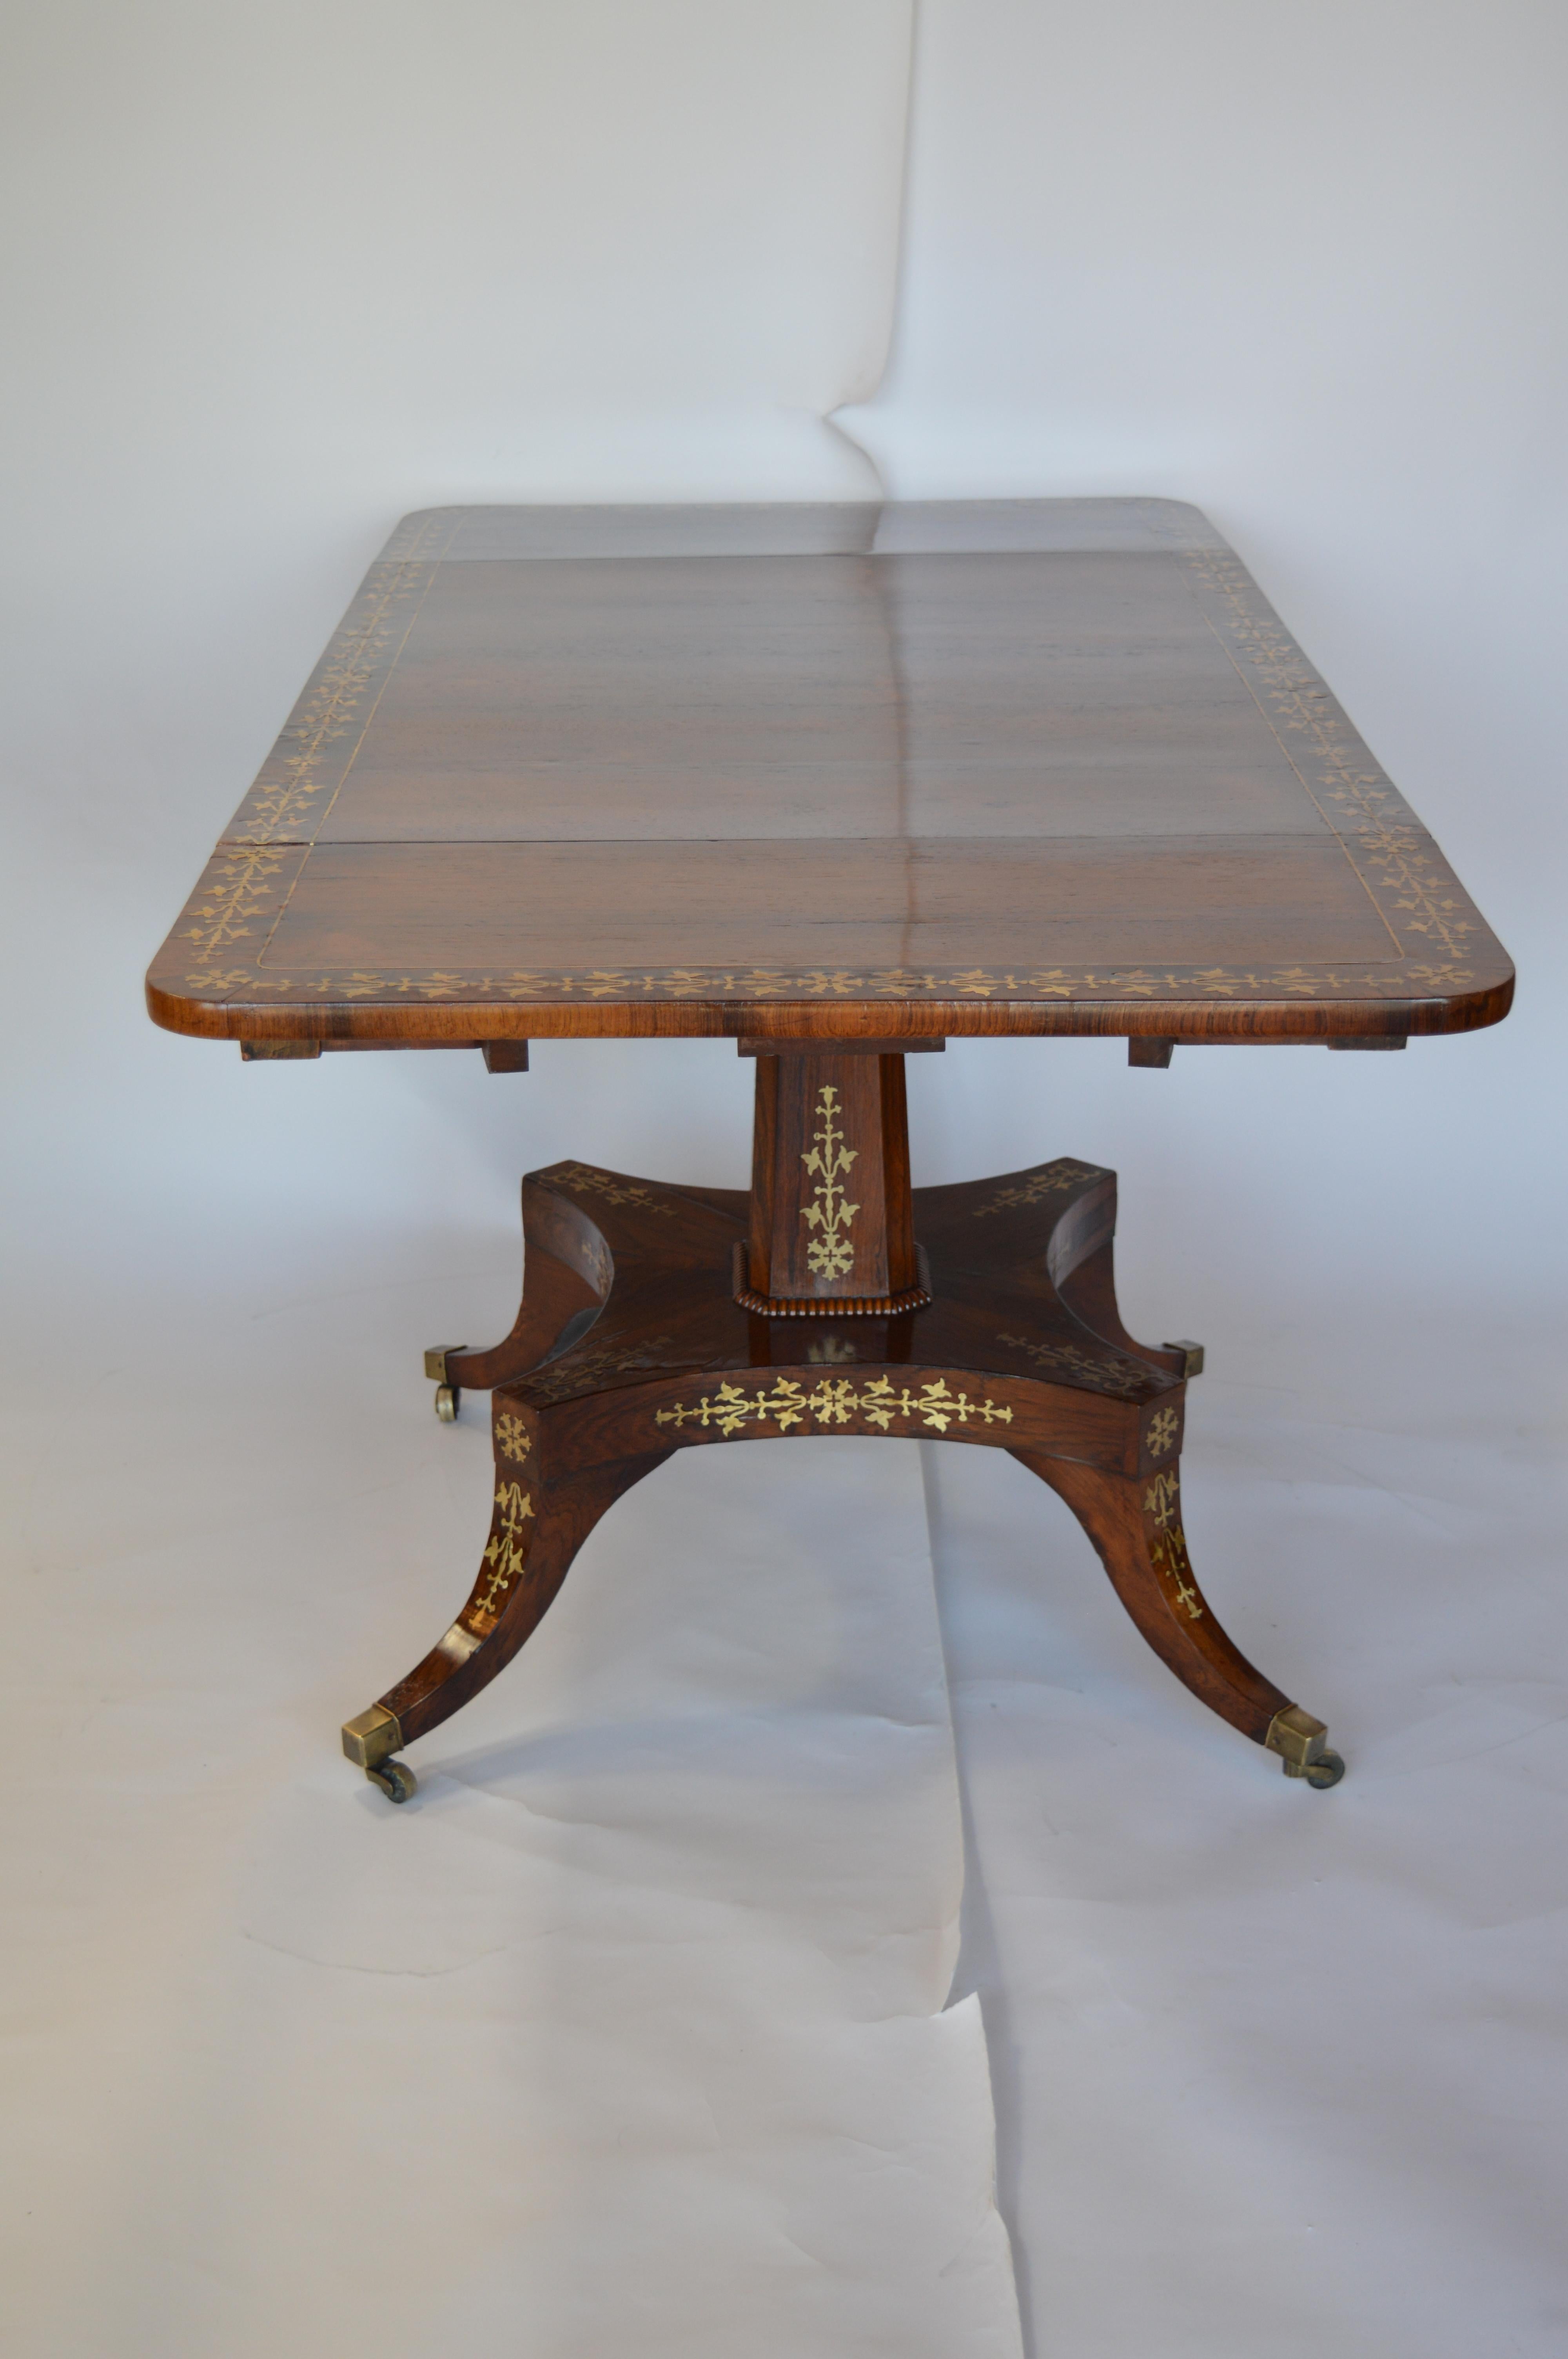 Regency Rosewood Pedestal Table with Brass Inlaid For Sale 2